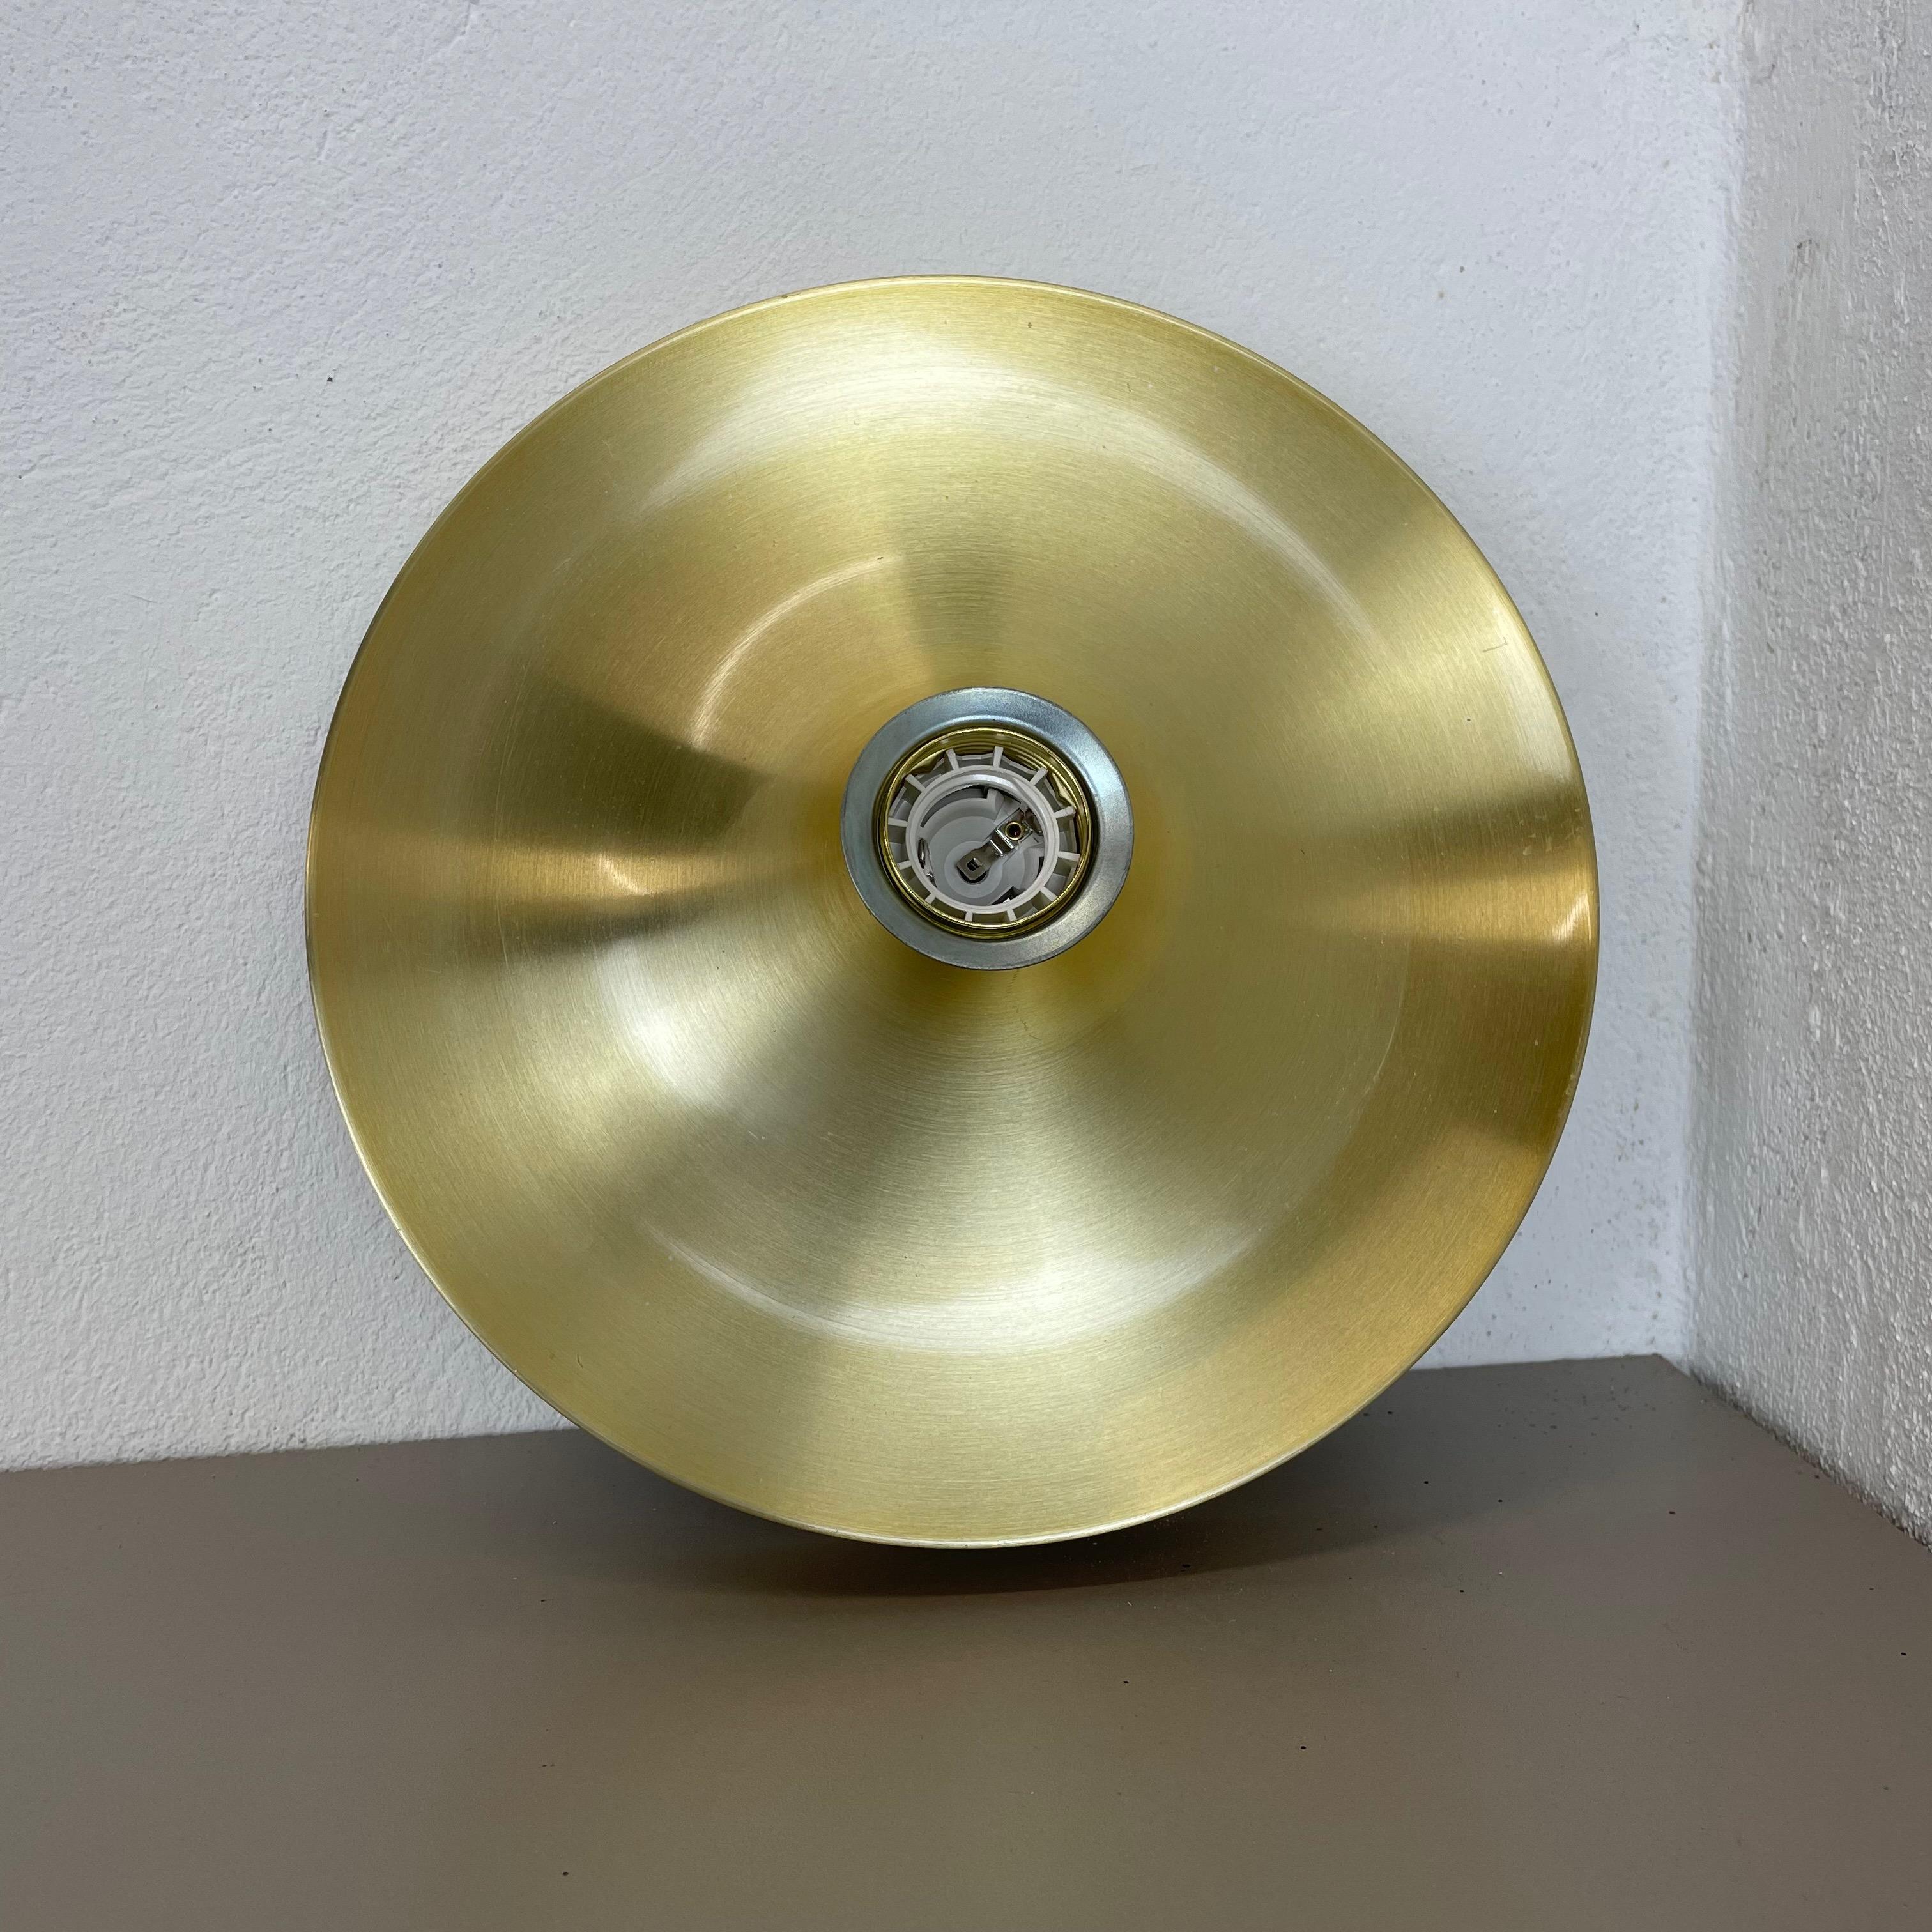 Article:

wall light sconces



Origin:

Germany


Producer:

HONSEL Lights, Germany 


Age:

1970s


original 1970s modernist German wall light made of solid metal aluminum. This item was produced by HONSEL Lights in the 1960s